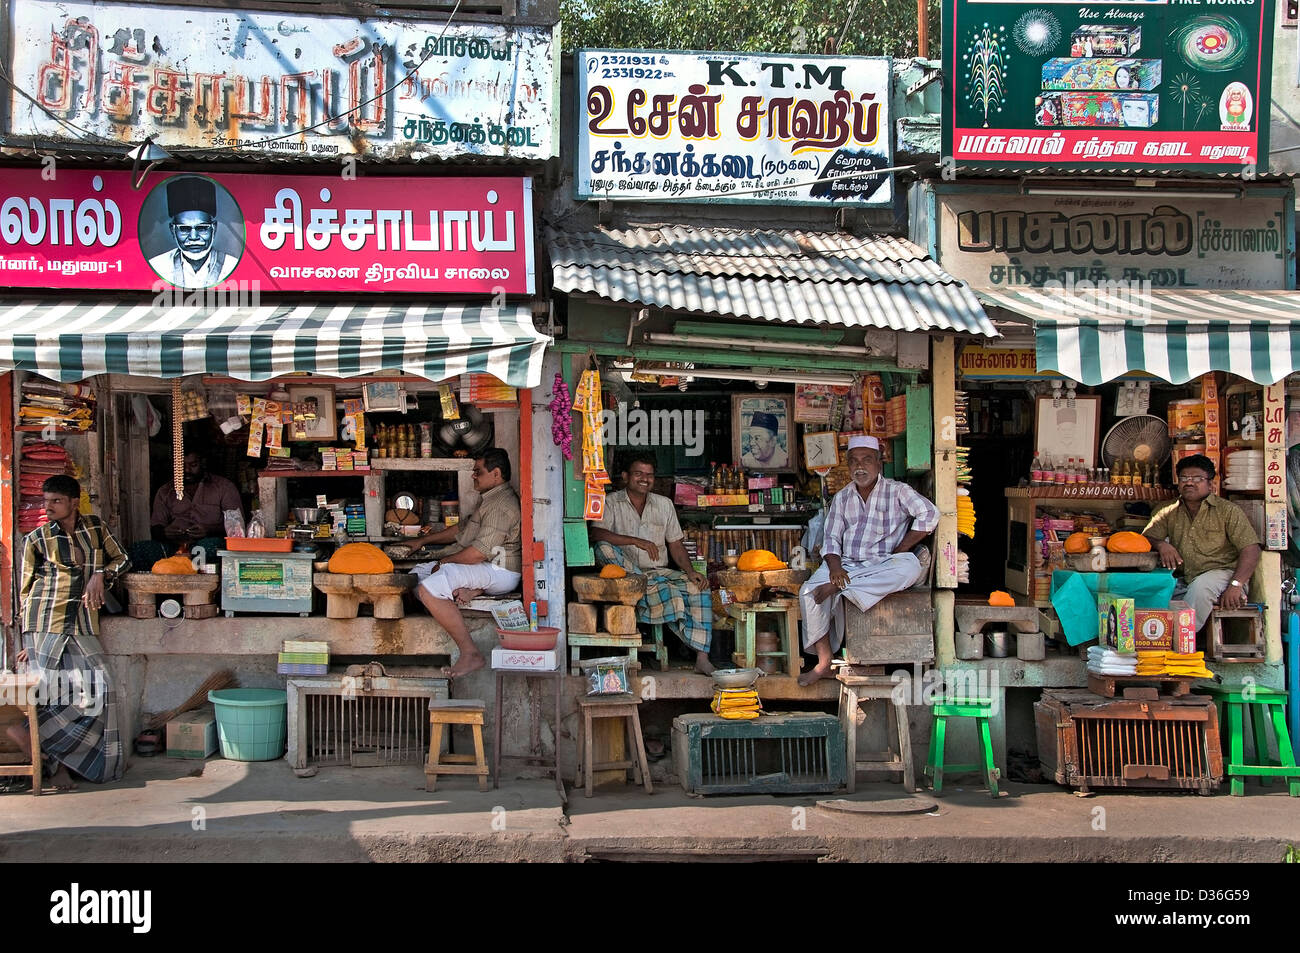 Wholesale Grocery Shop In Madurai